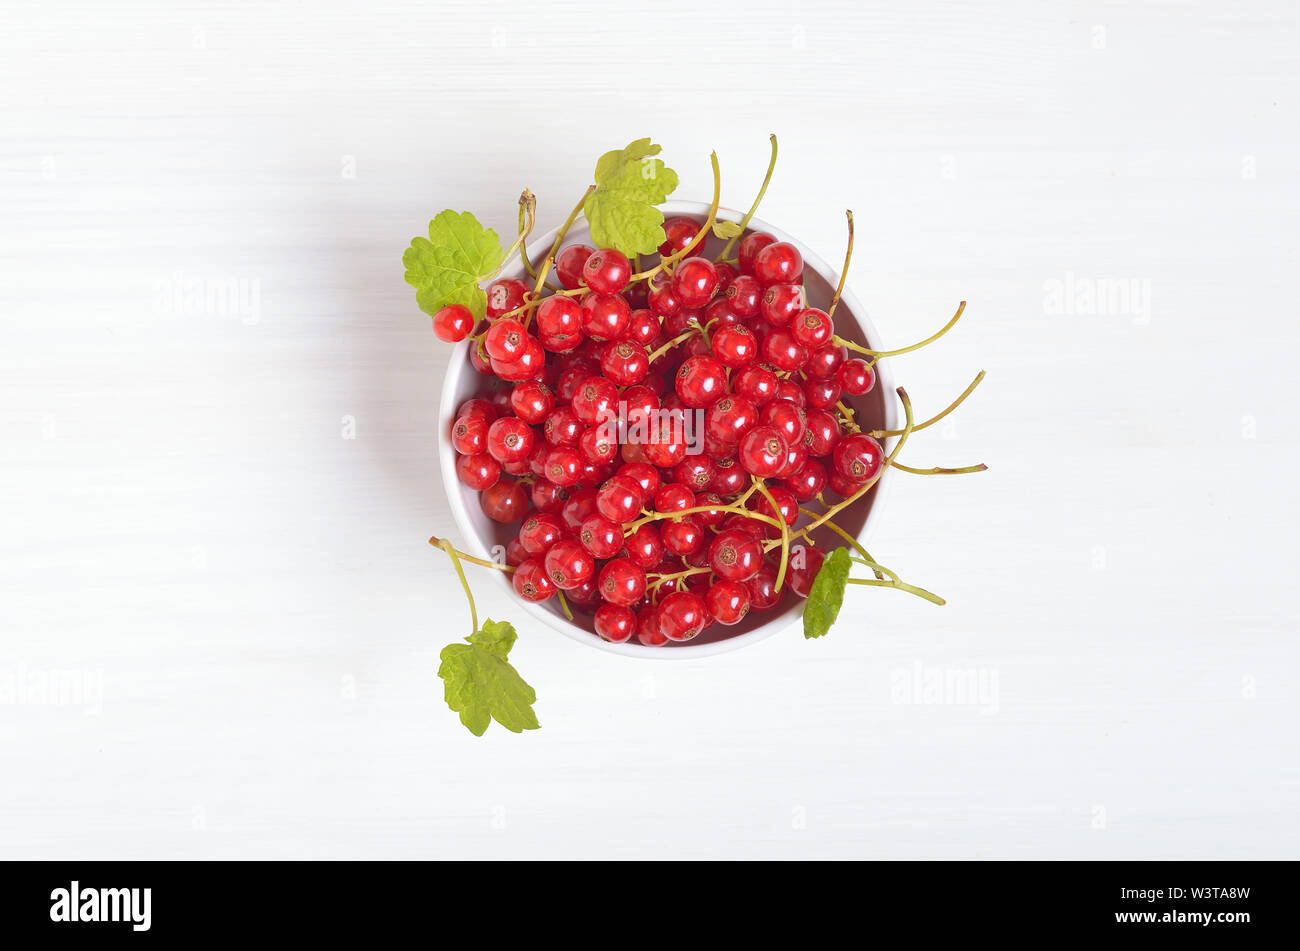 Red currants in white bowl on table, top view Stock Photo